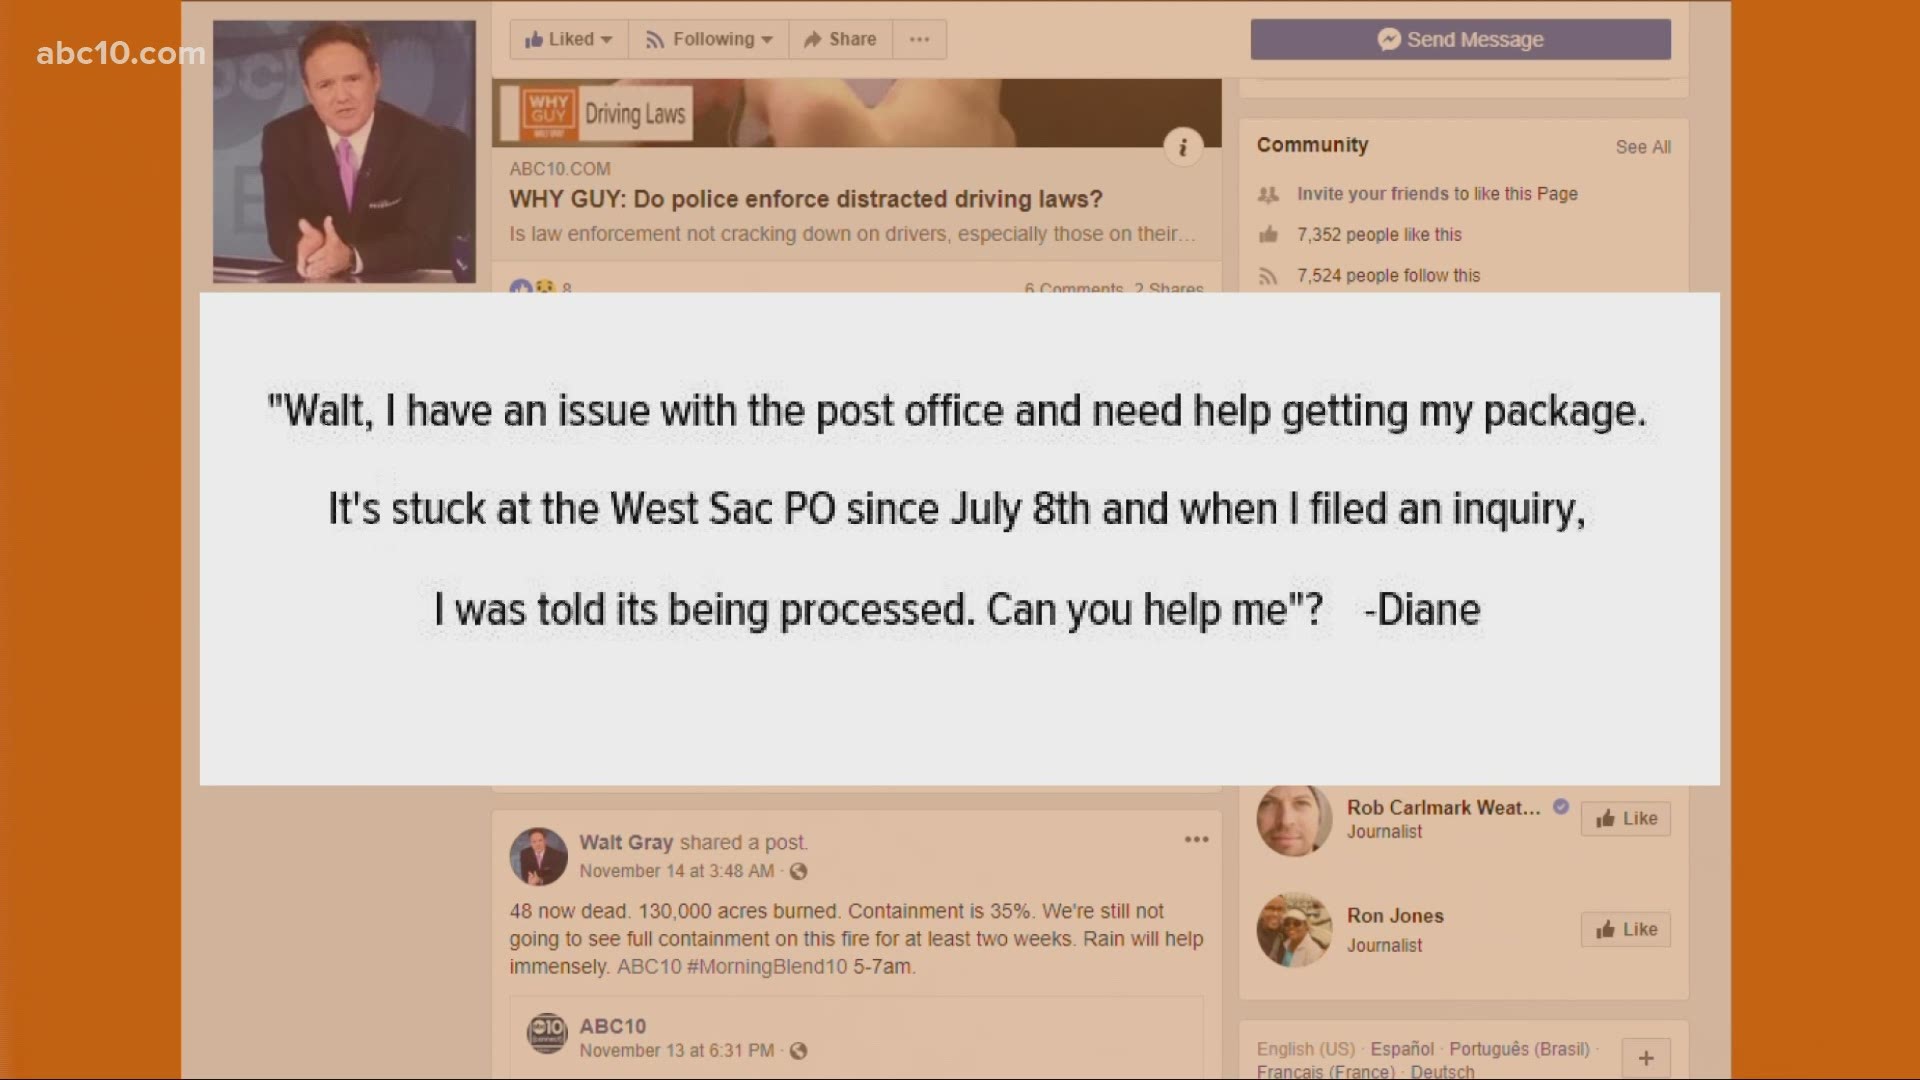 Diane reached out to Walt because her package sat idly at the West Sacramento Post Office for nearly a month.